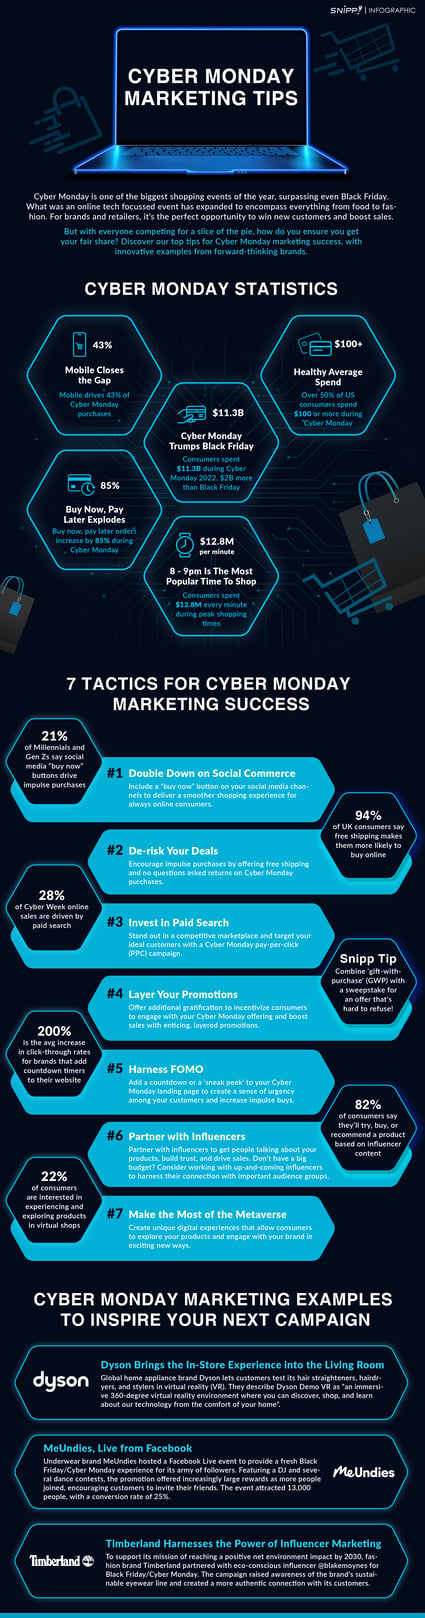 Cyber Monday Marketing Tips [Infographic]